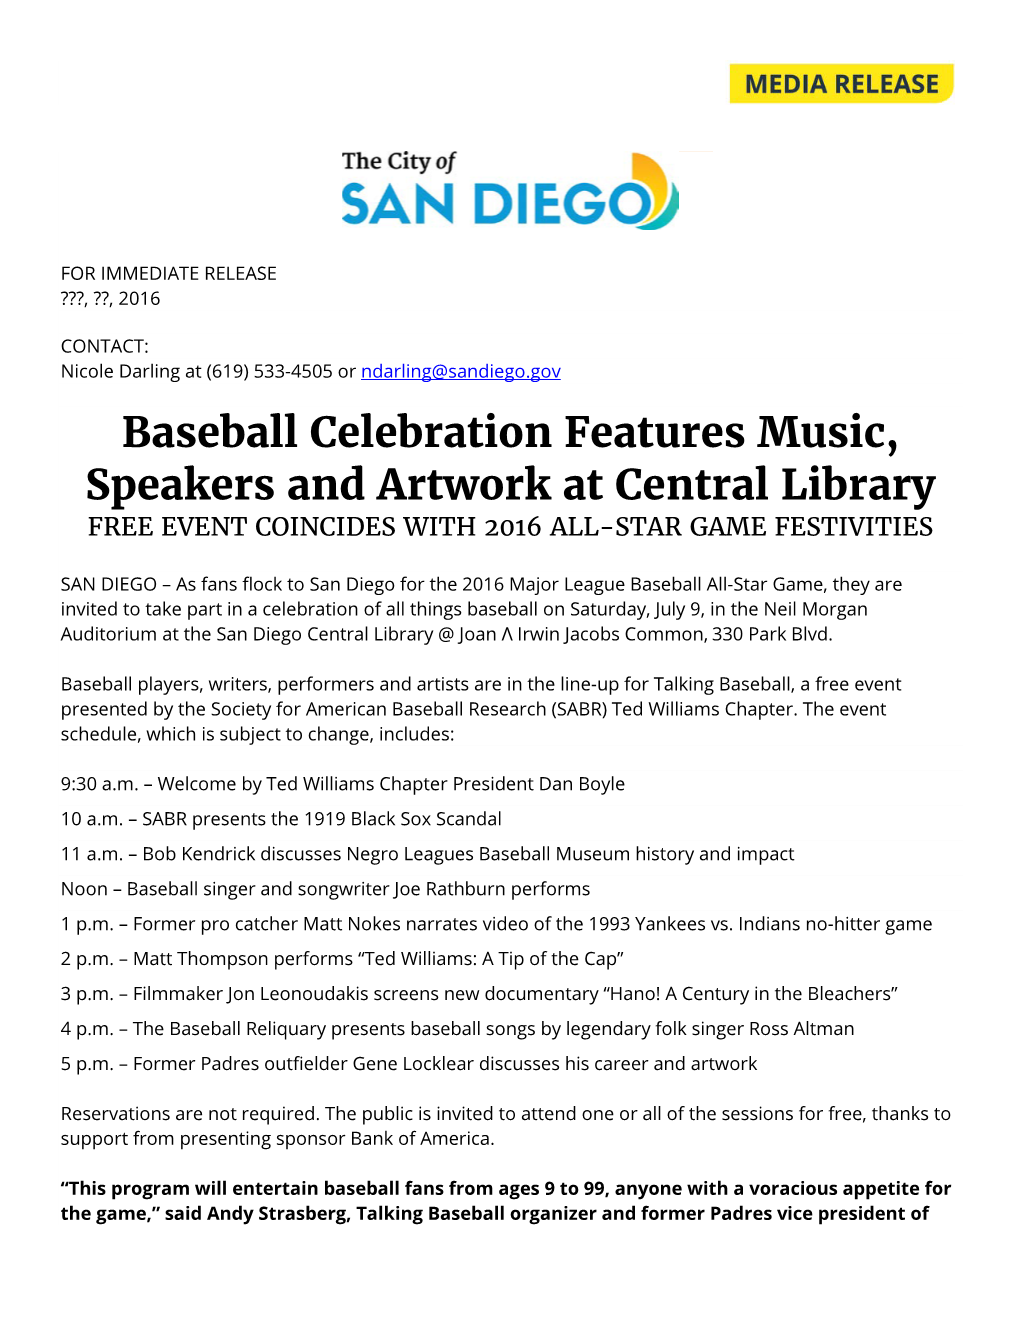 Baseball Celebration Features Music, Speakers and Artwork at Central Library FREE EVENT COINCIDES with 2016 ALL-STAR GAME FESTIVITIES